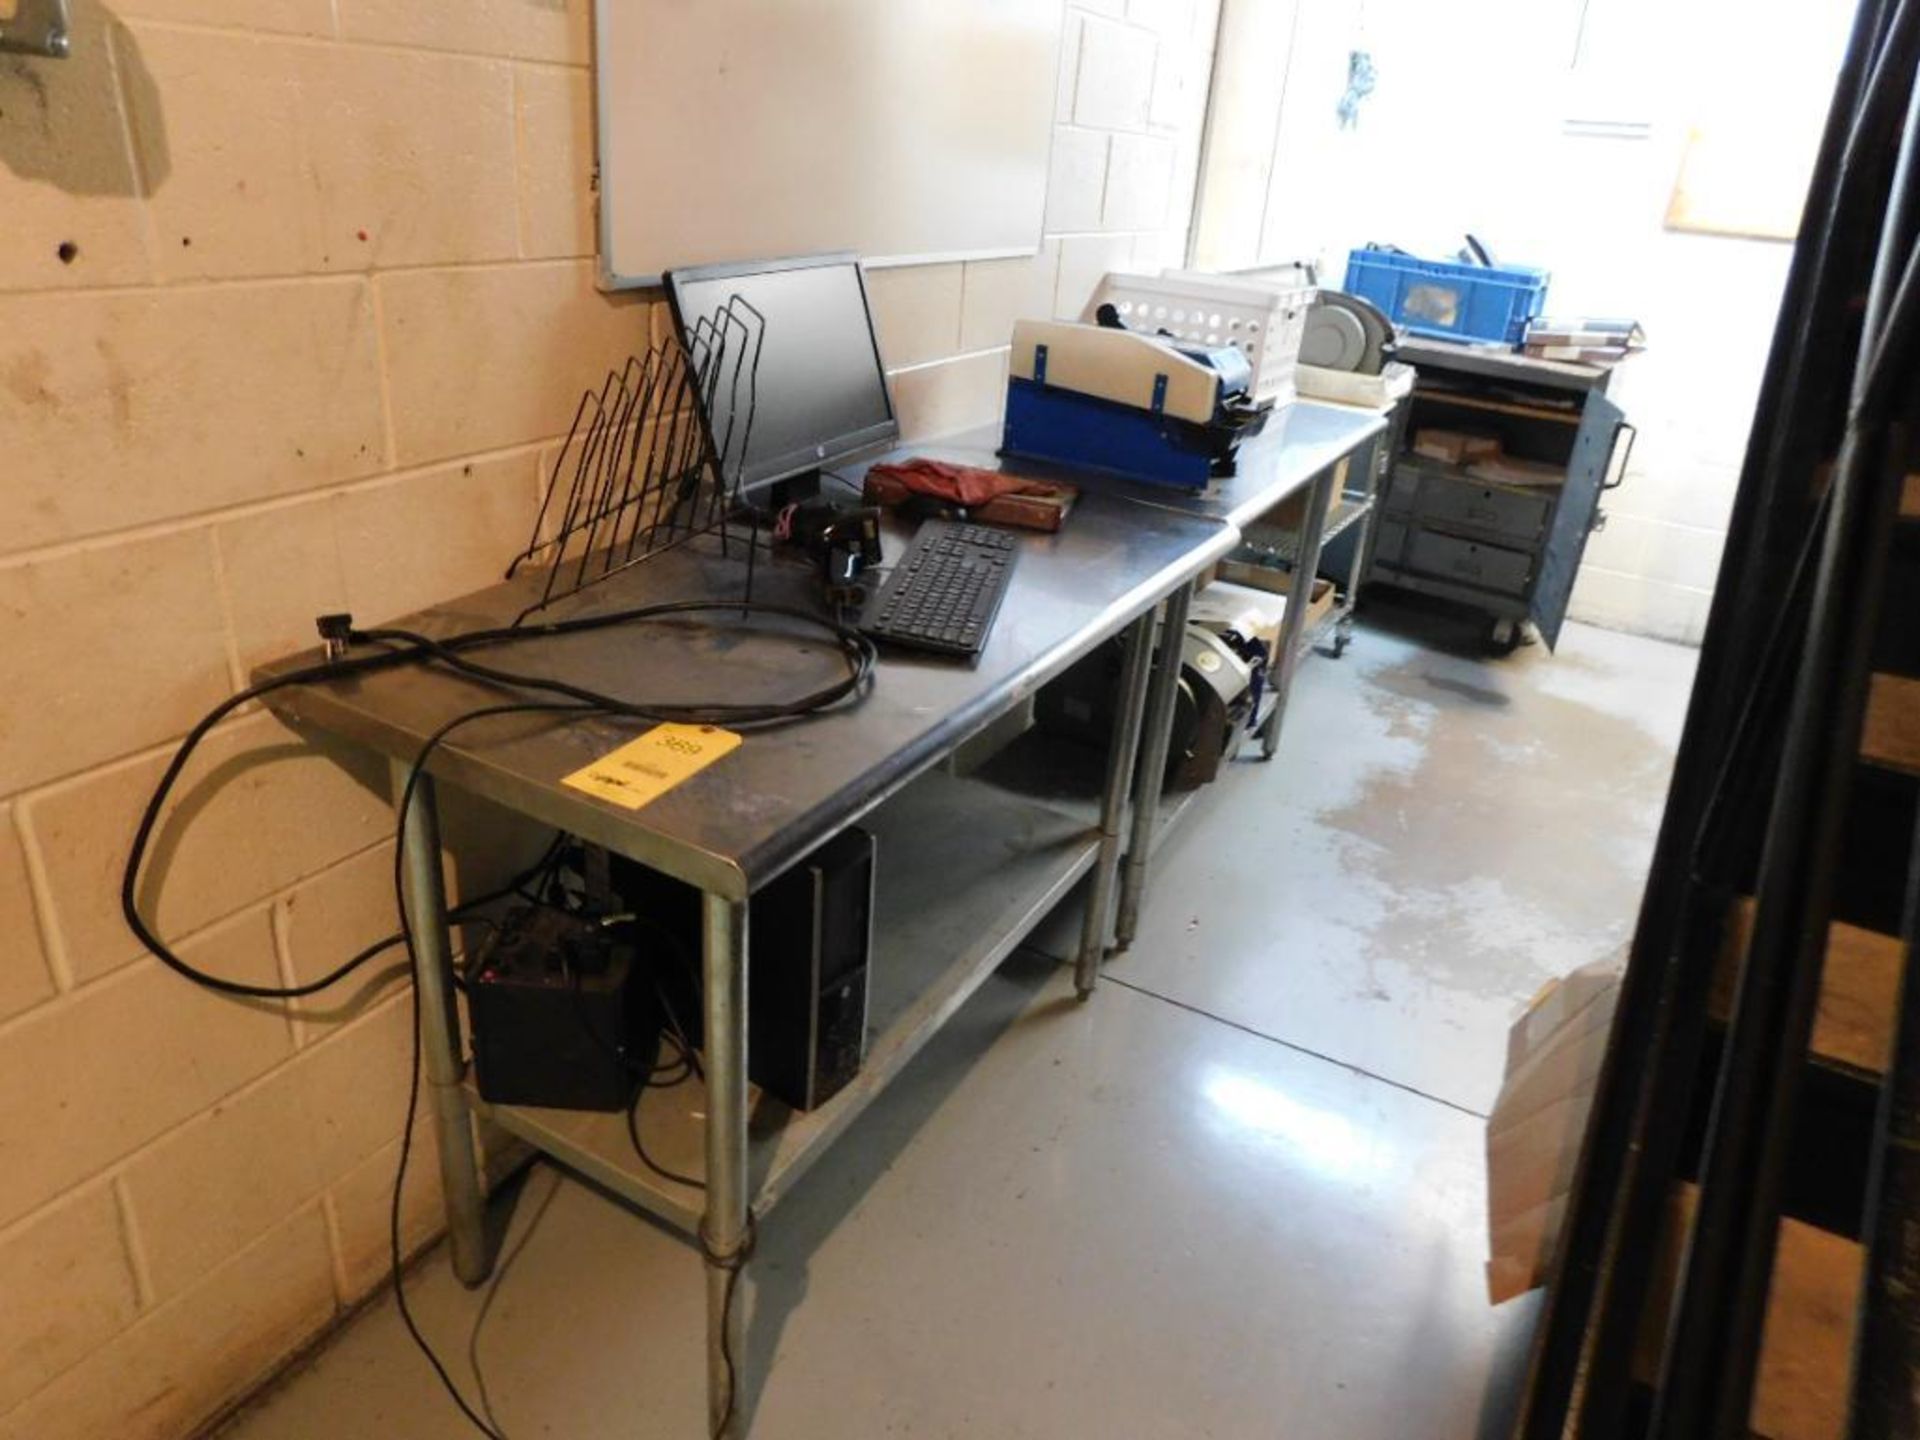 LOT: Contents of Stairwell Room: (2) Stainless Steel Tables, Rolling Shop Cart, File Cabinets, Shelv